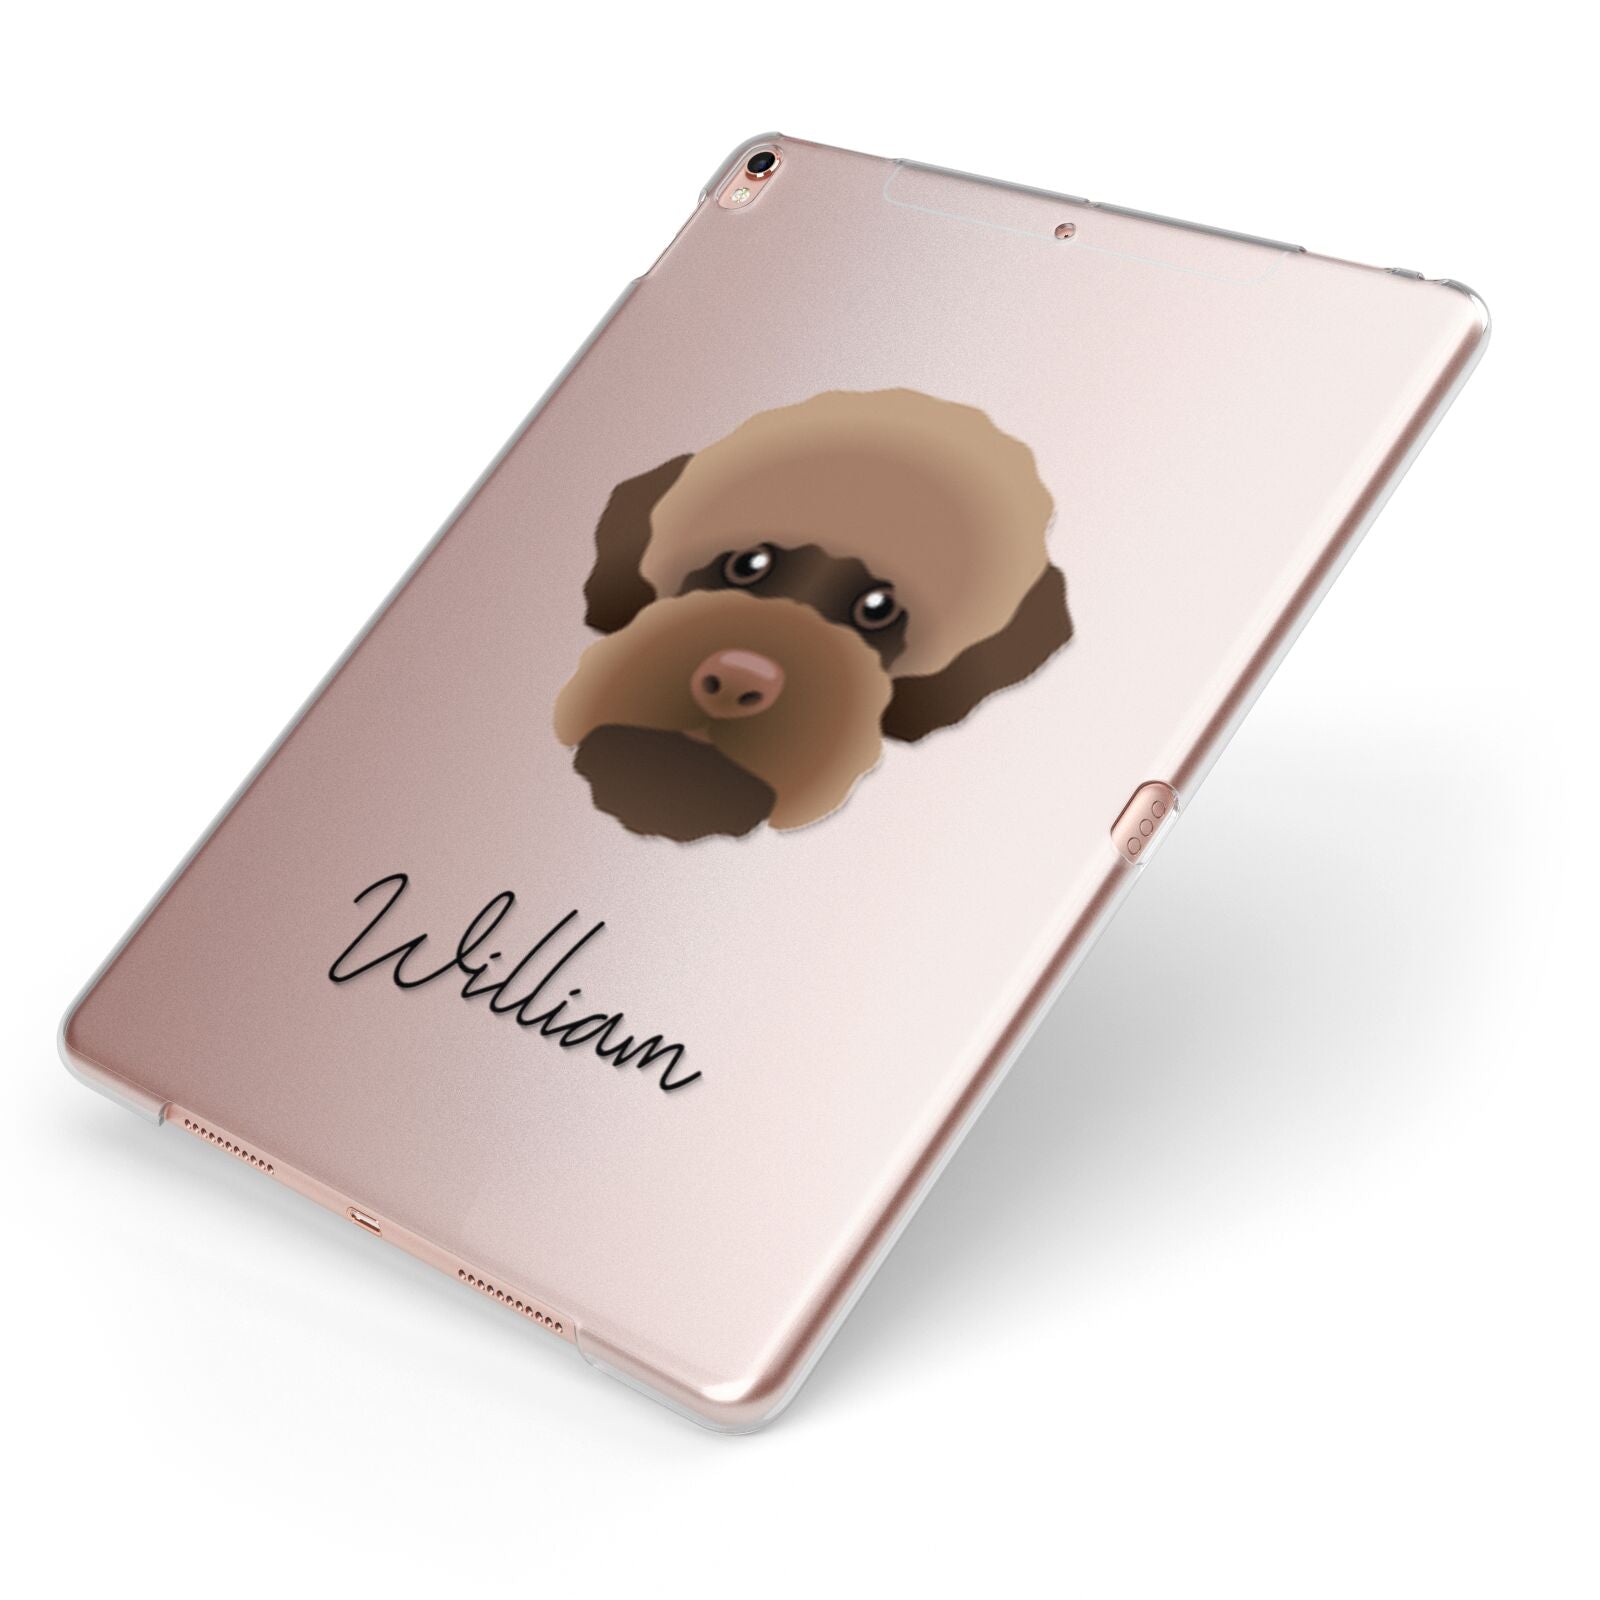 Lagotto Romagnolo Personalised Apple iPad Case on Rose Gold iPad Side View